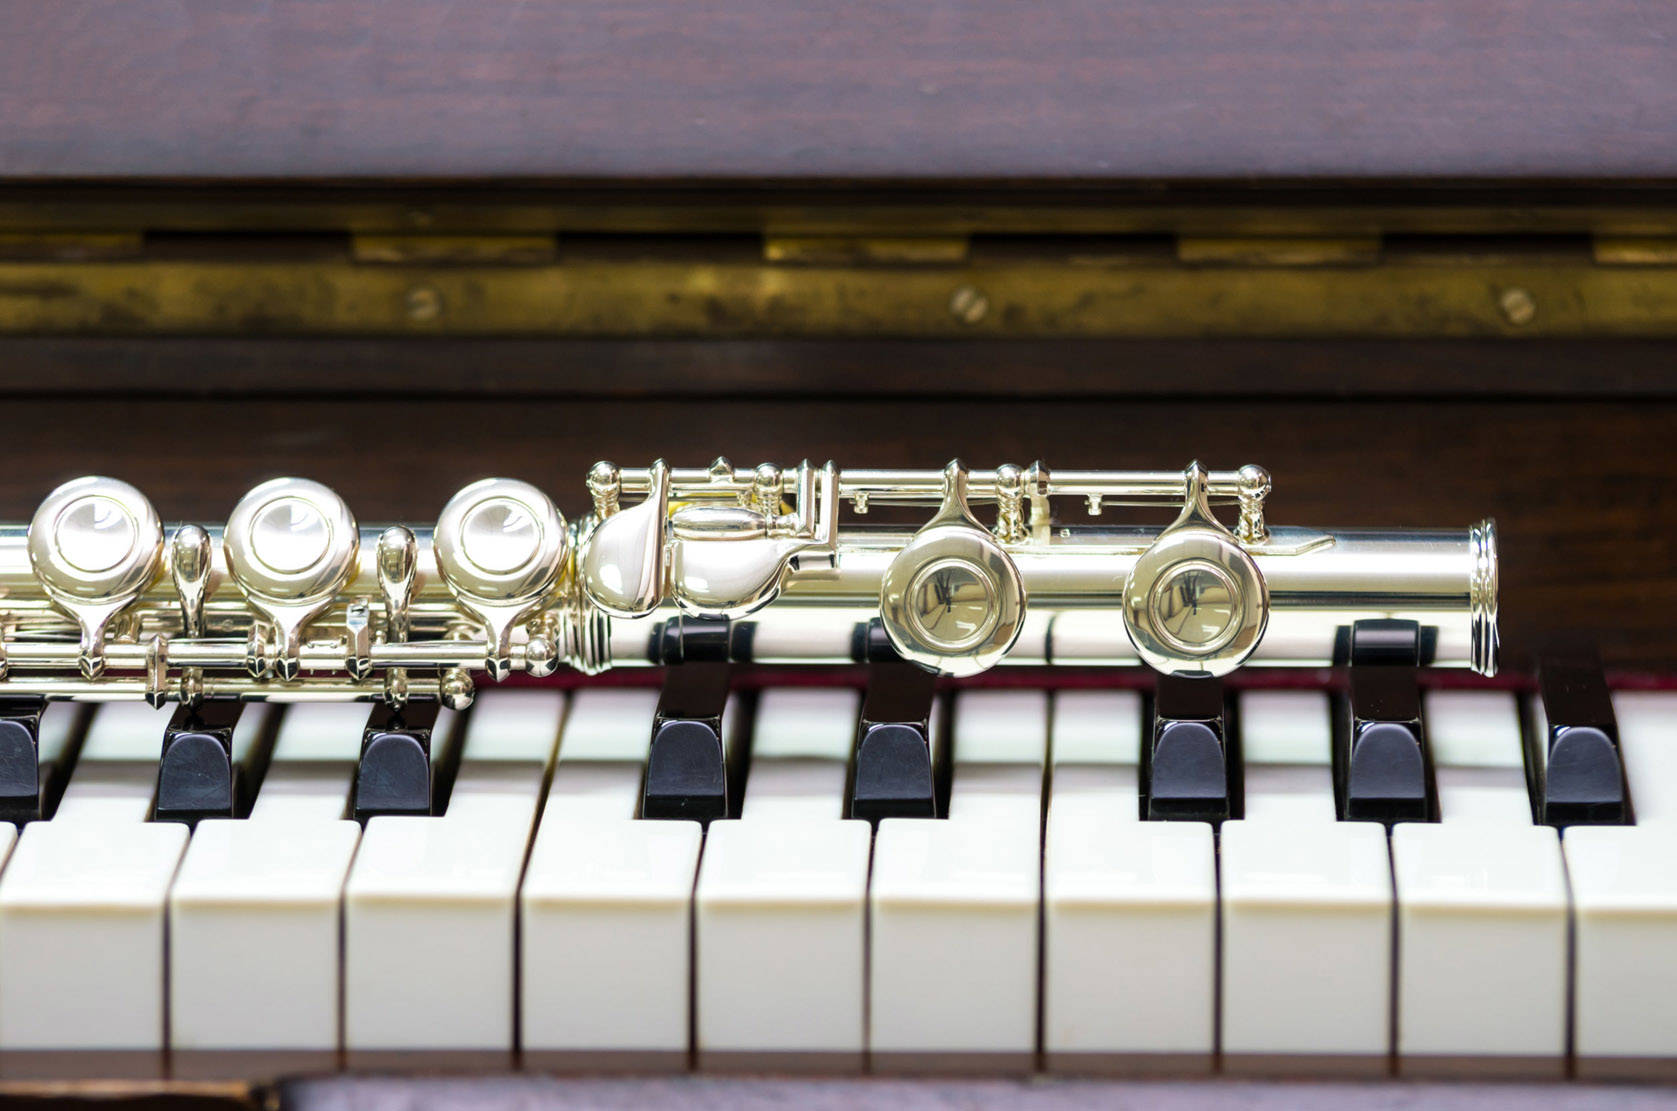 Closeup flute on the keyboard of piano, musical instrument (File photo)